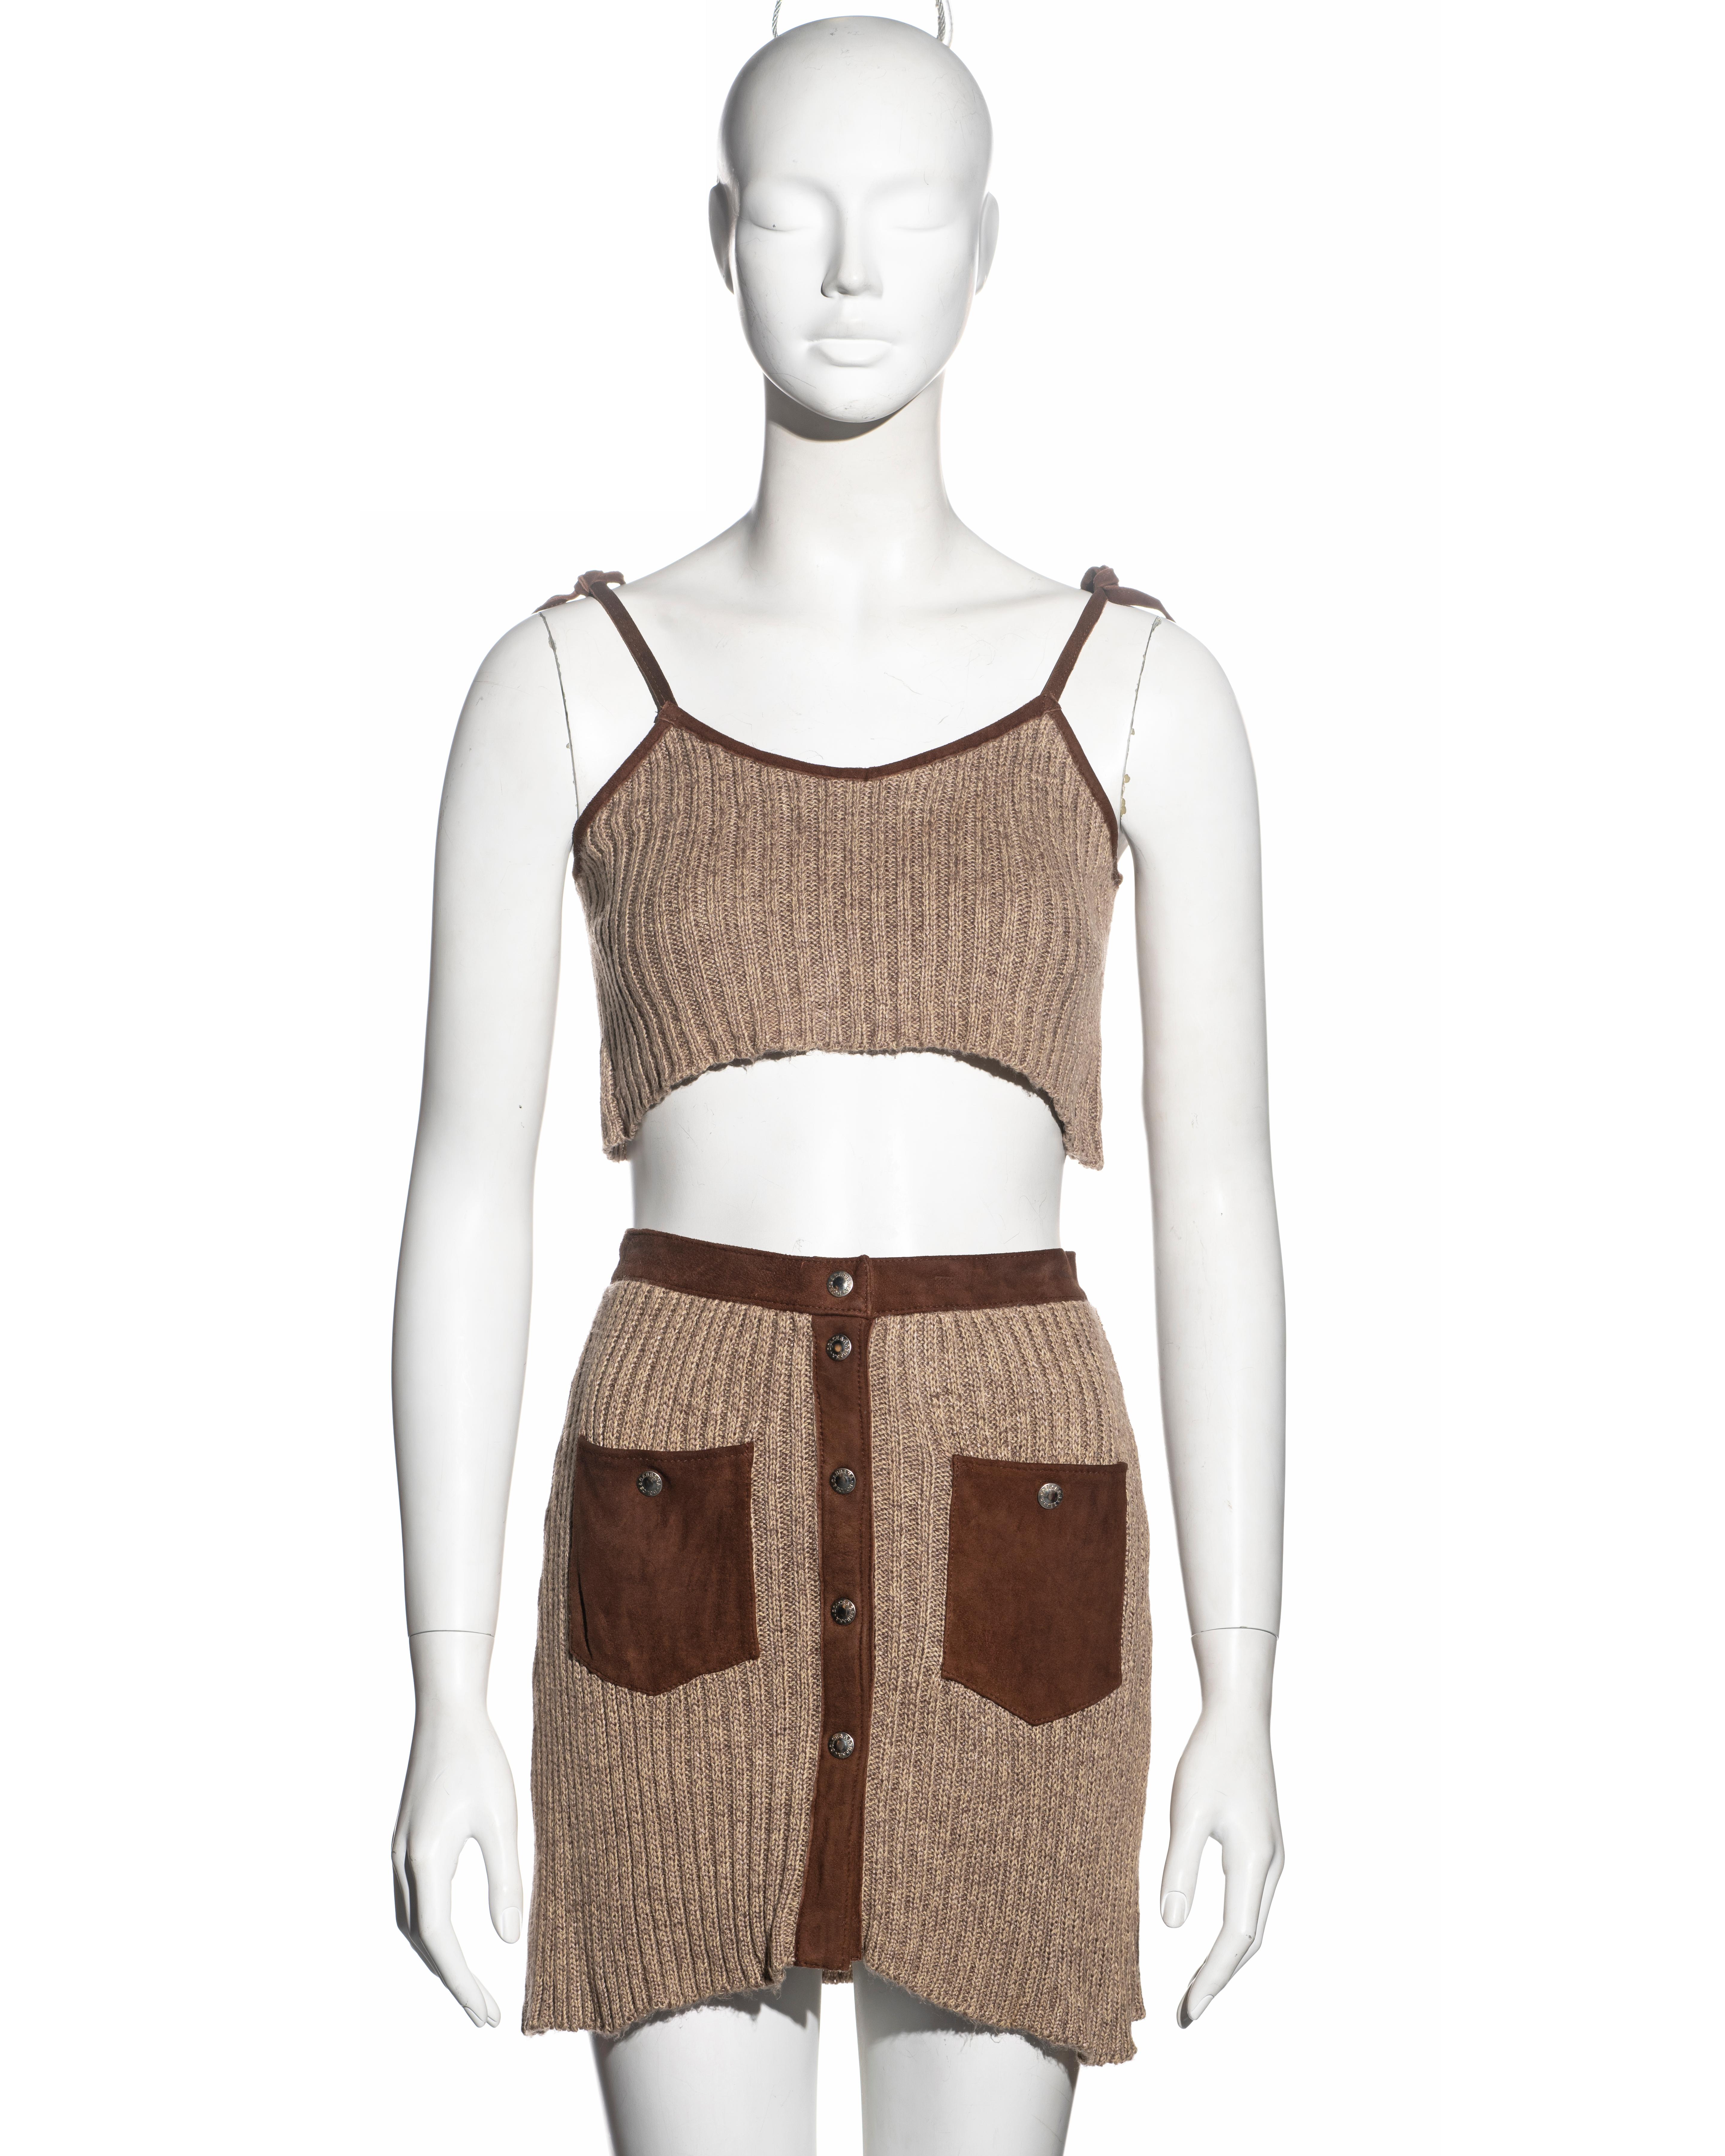 ▪ Dolce & Gabbana crop top and skirt set
▪ Silk-cotton ribbed knit 
▪ Brown suede trim
▪ Silver press stud buttons 
▪ 2 front patch pockets
▪ IT 42 - FR 38 - US 6
▪ Spring-Summer 1994
▪ 85% Silk, 15% Cotton
▪ Made in Italy